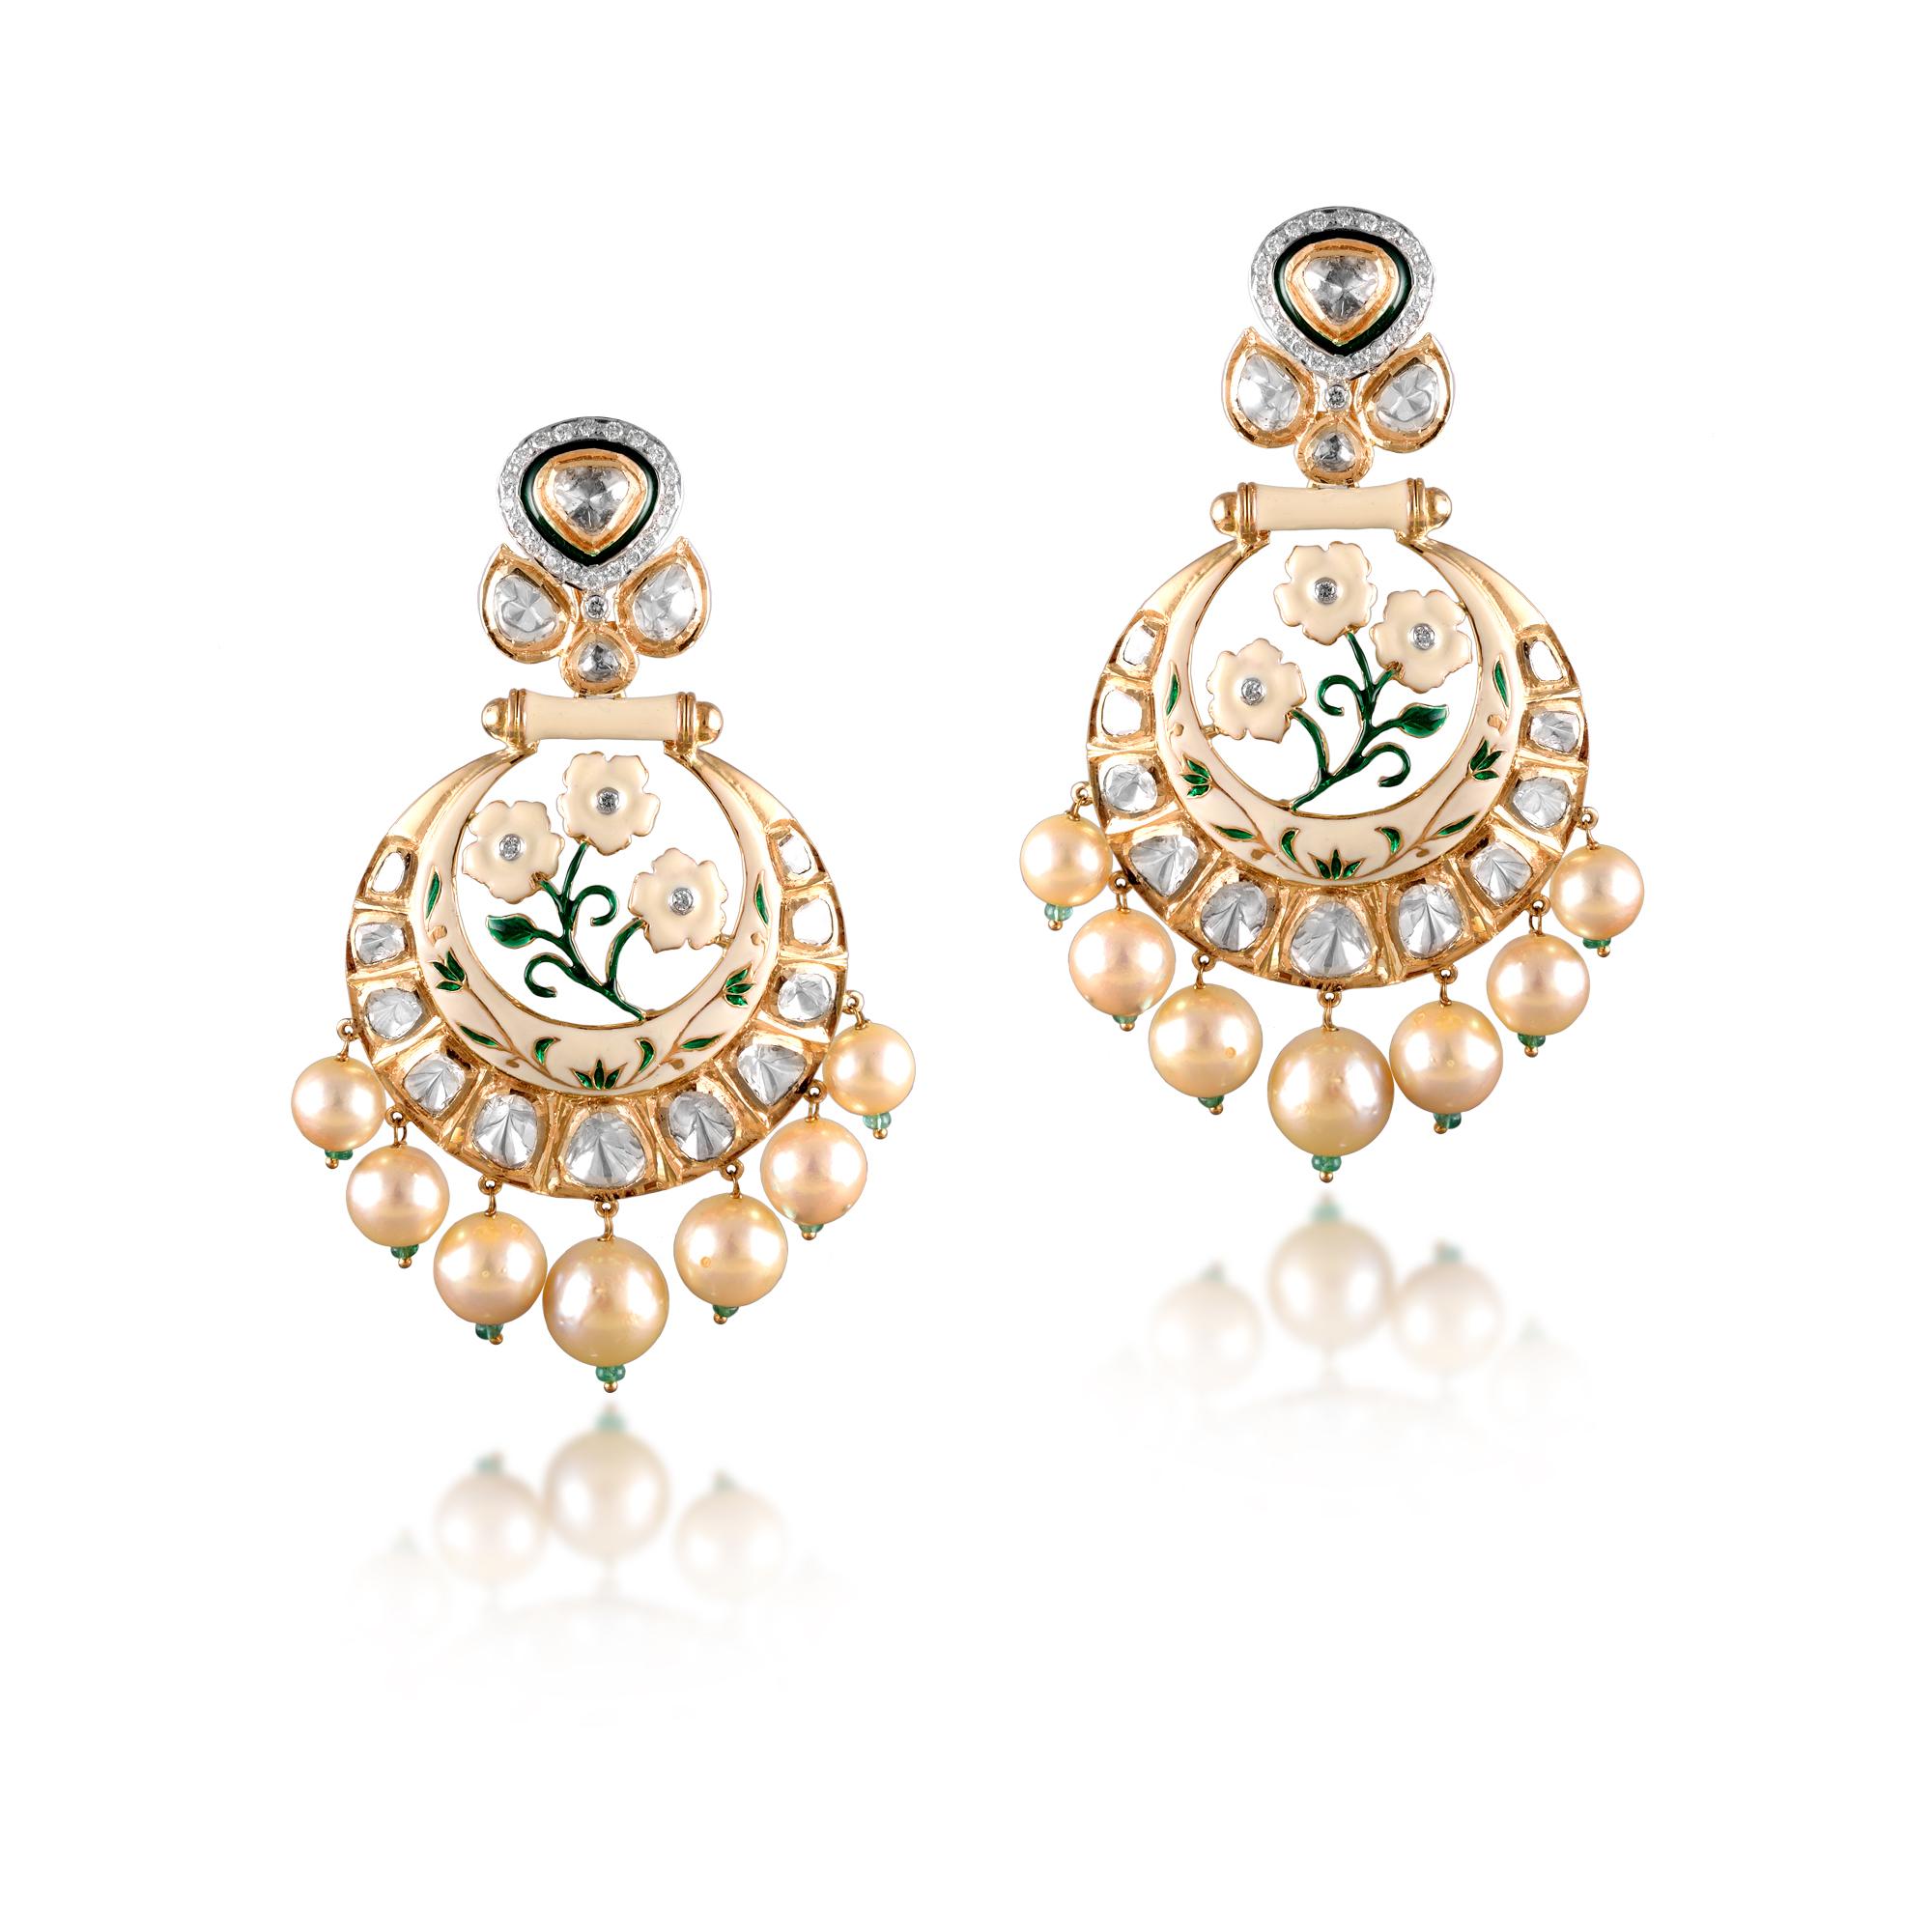 Diamond: 1.00 carat 
Polki: 4.38 carat
Pearl: 84.43 carat
Emerald: 0.76 carat
18kt Gold: 32.426 grams 
Ref No: DT-GED
Stunning earrings inspired by the white lotus, envisages an aura of tranquility and elegance. The floral motifs and the south sea